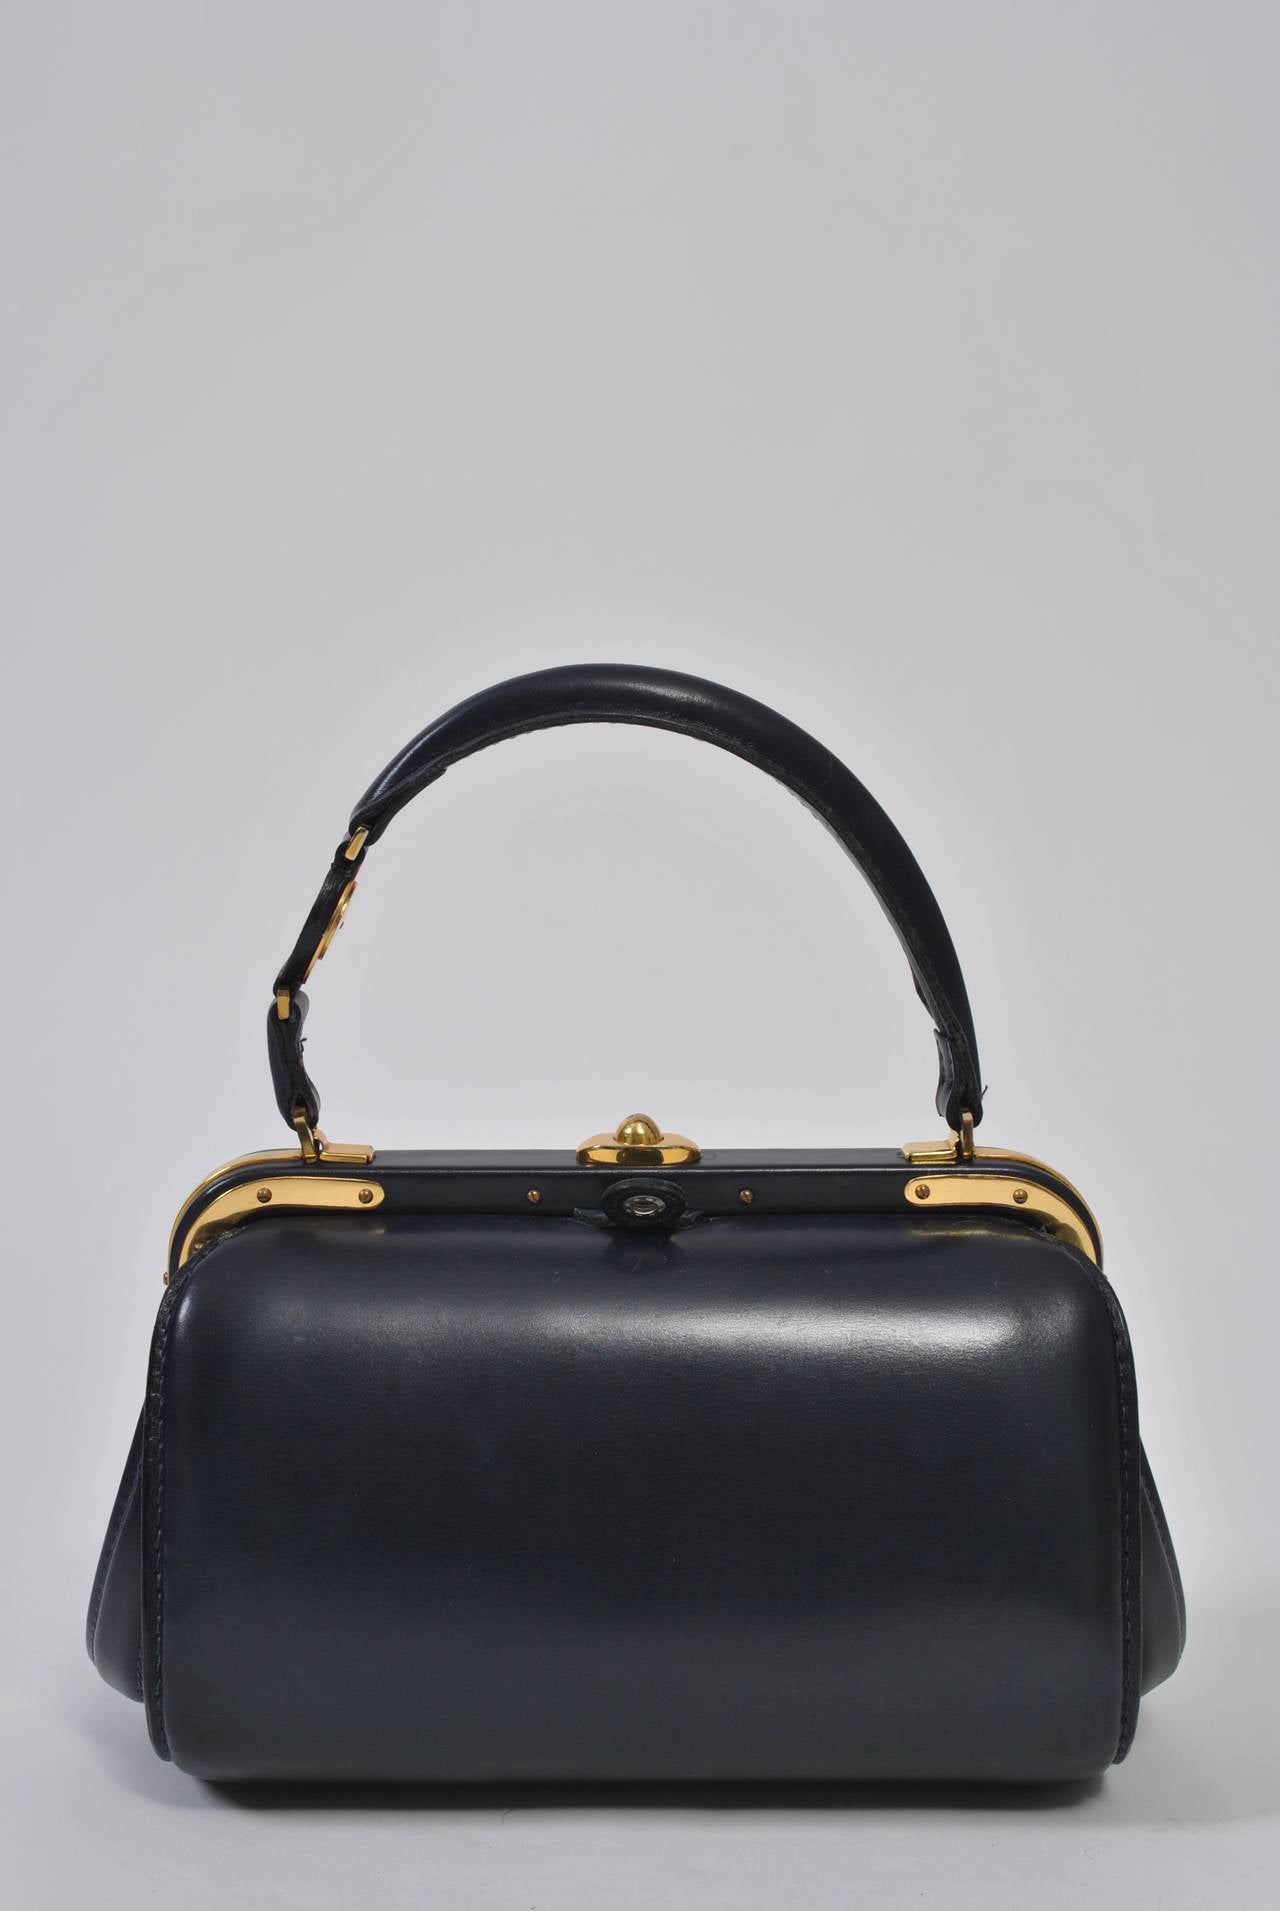 From high-end leather goods purveyor Lederer, this private-label 1960s handbag is crafted in France of dark navy leather and features distinctive gold metal hardware on the frame, handle, clasp, and feet. The rounded box shape is classic mid century